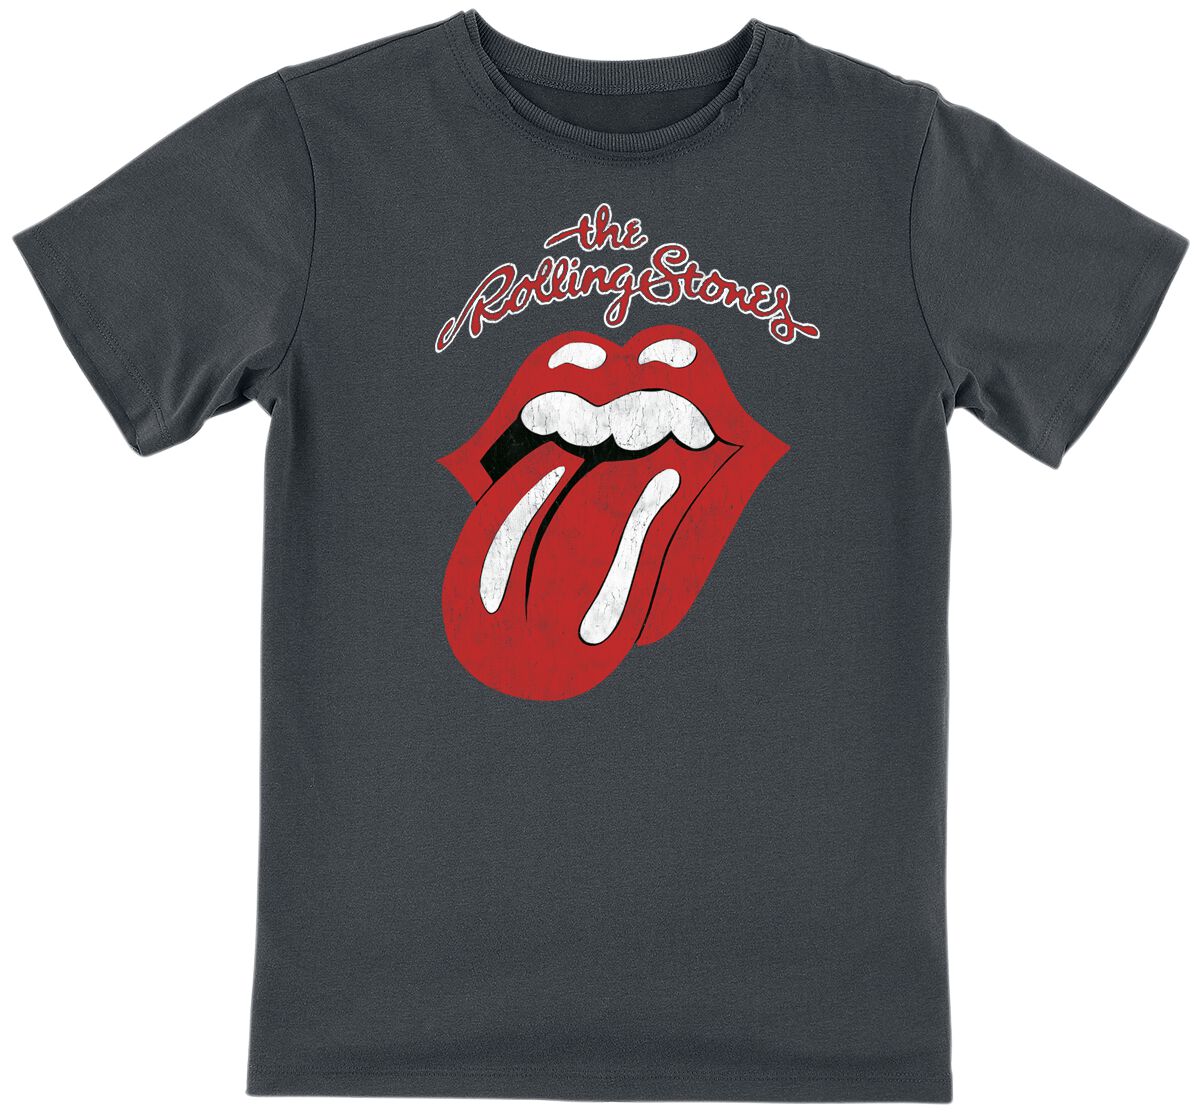 The Rolling Stones Amplified Collection - Square Tongue T-Shirt charcoal in 152